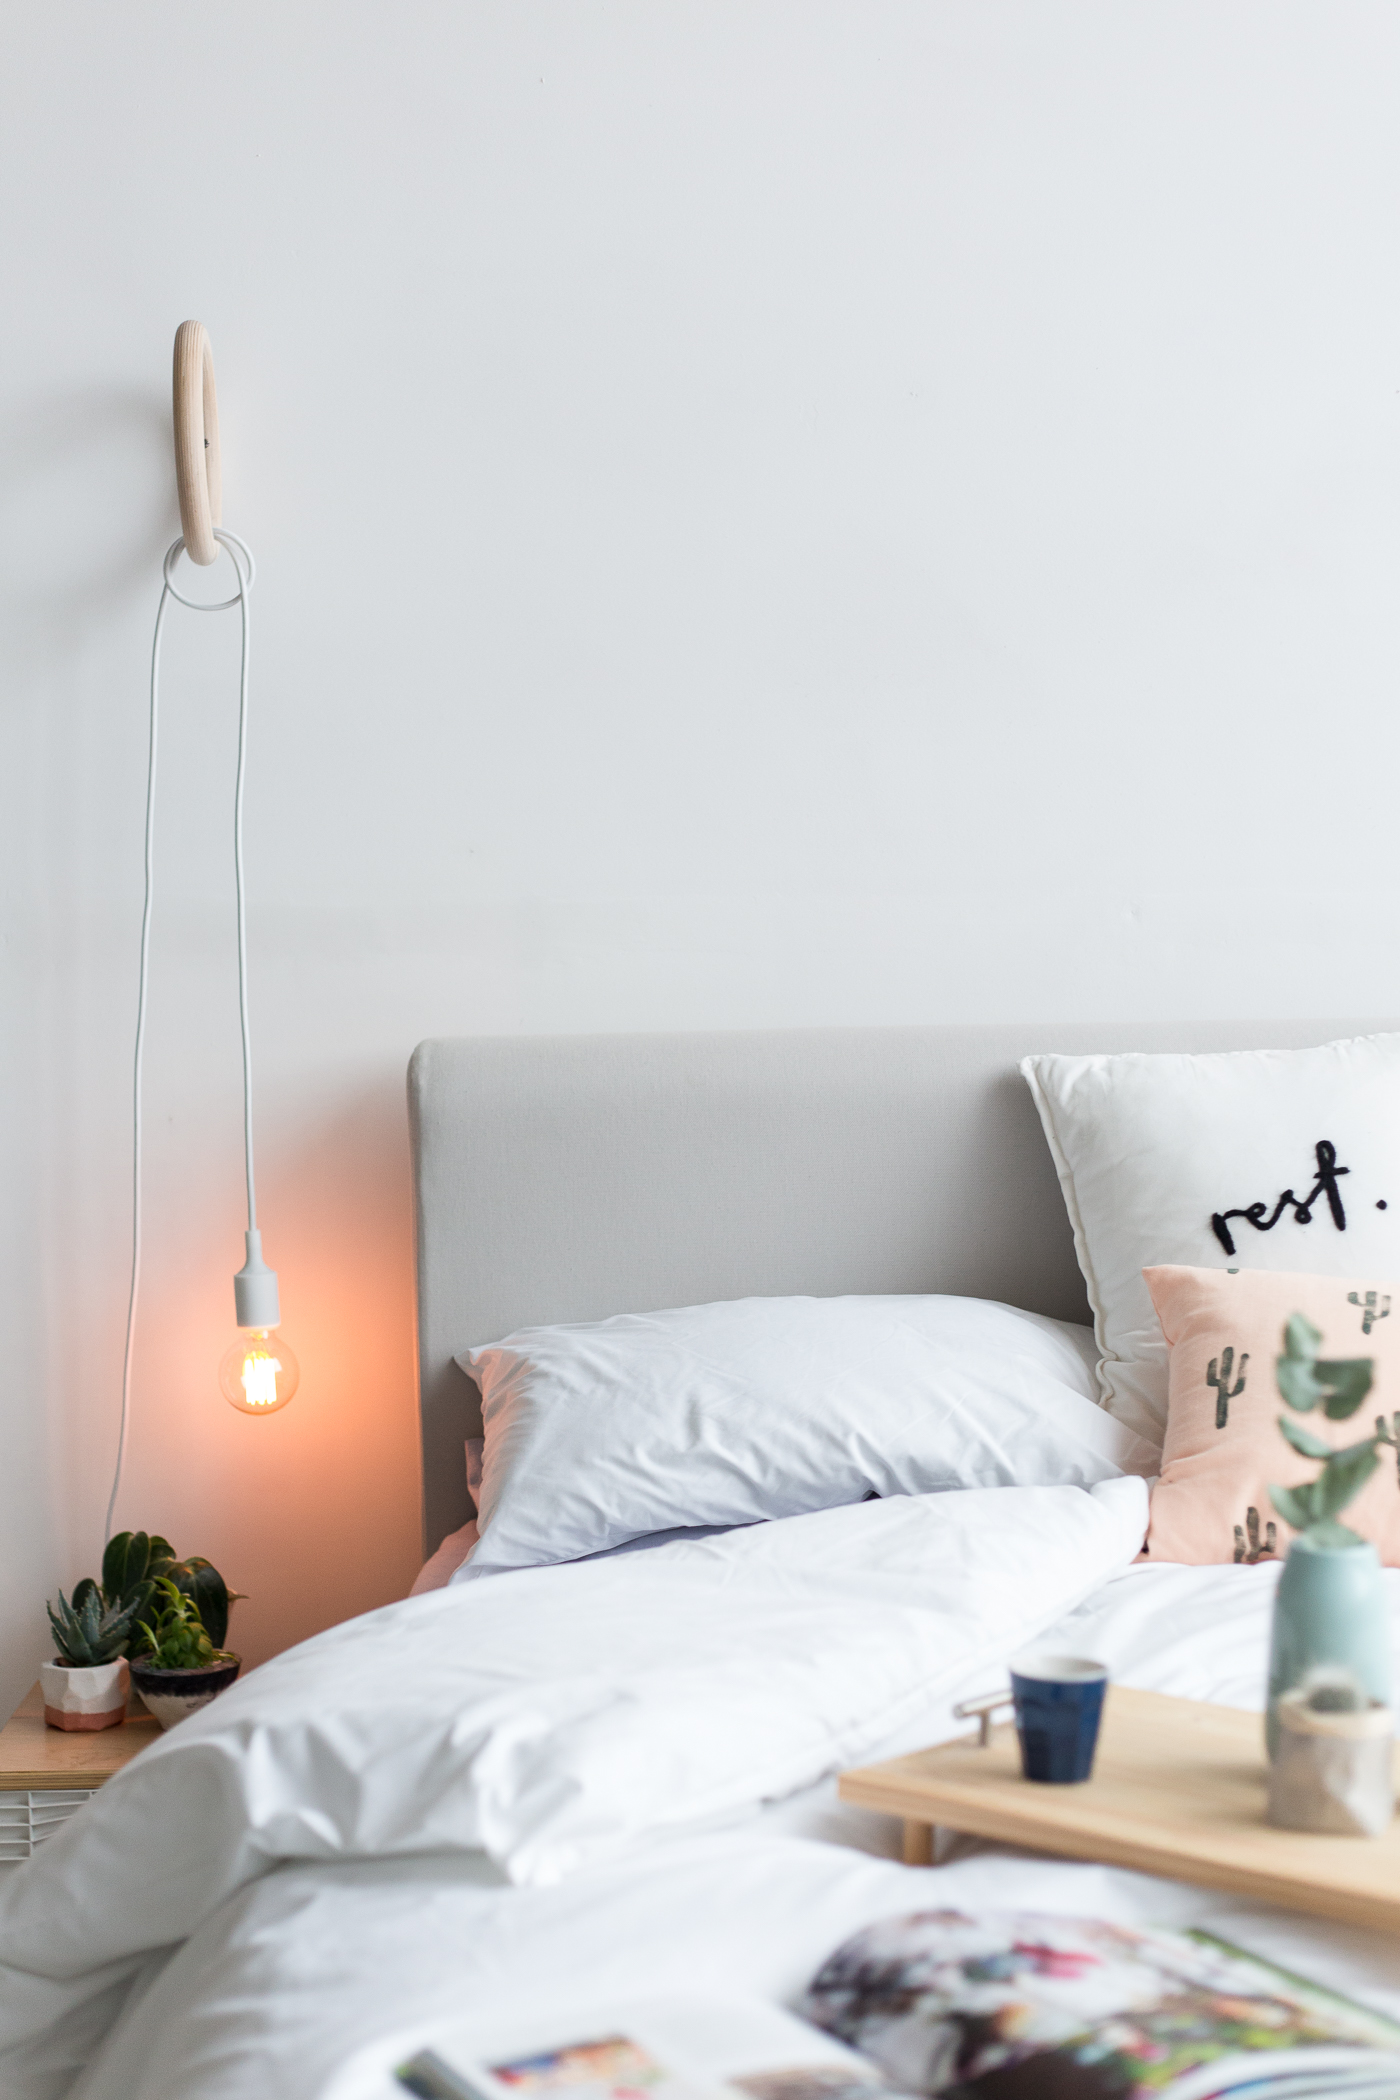 Brighten up your Bedroom Decor with this DIY Gym Ring Hanging Lamp